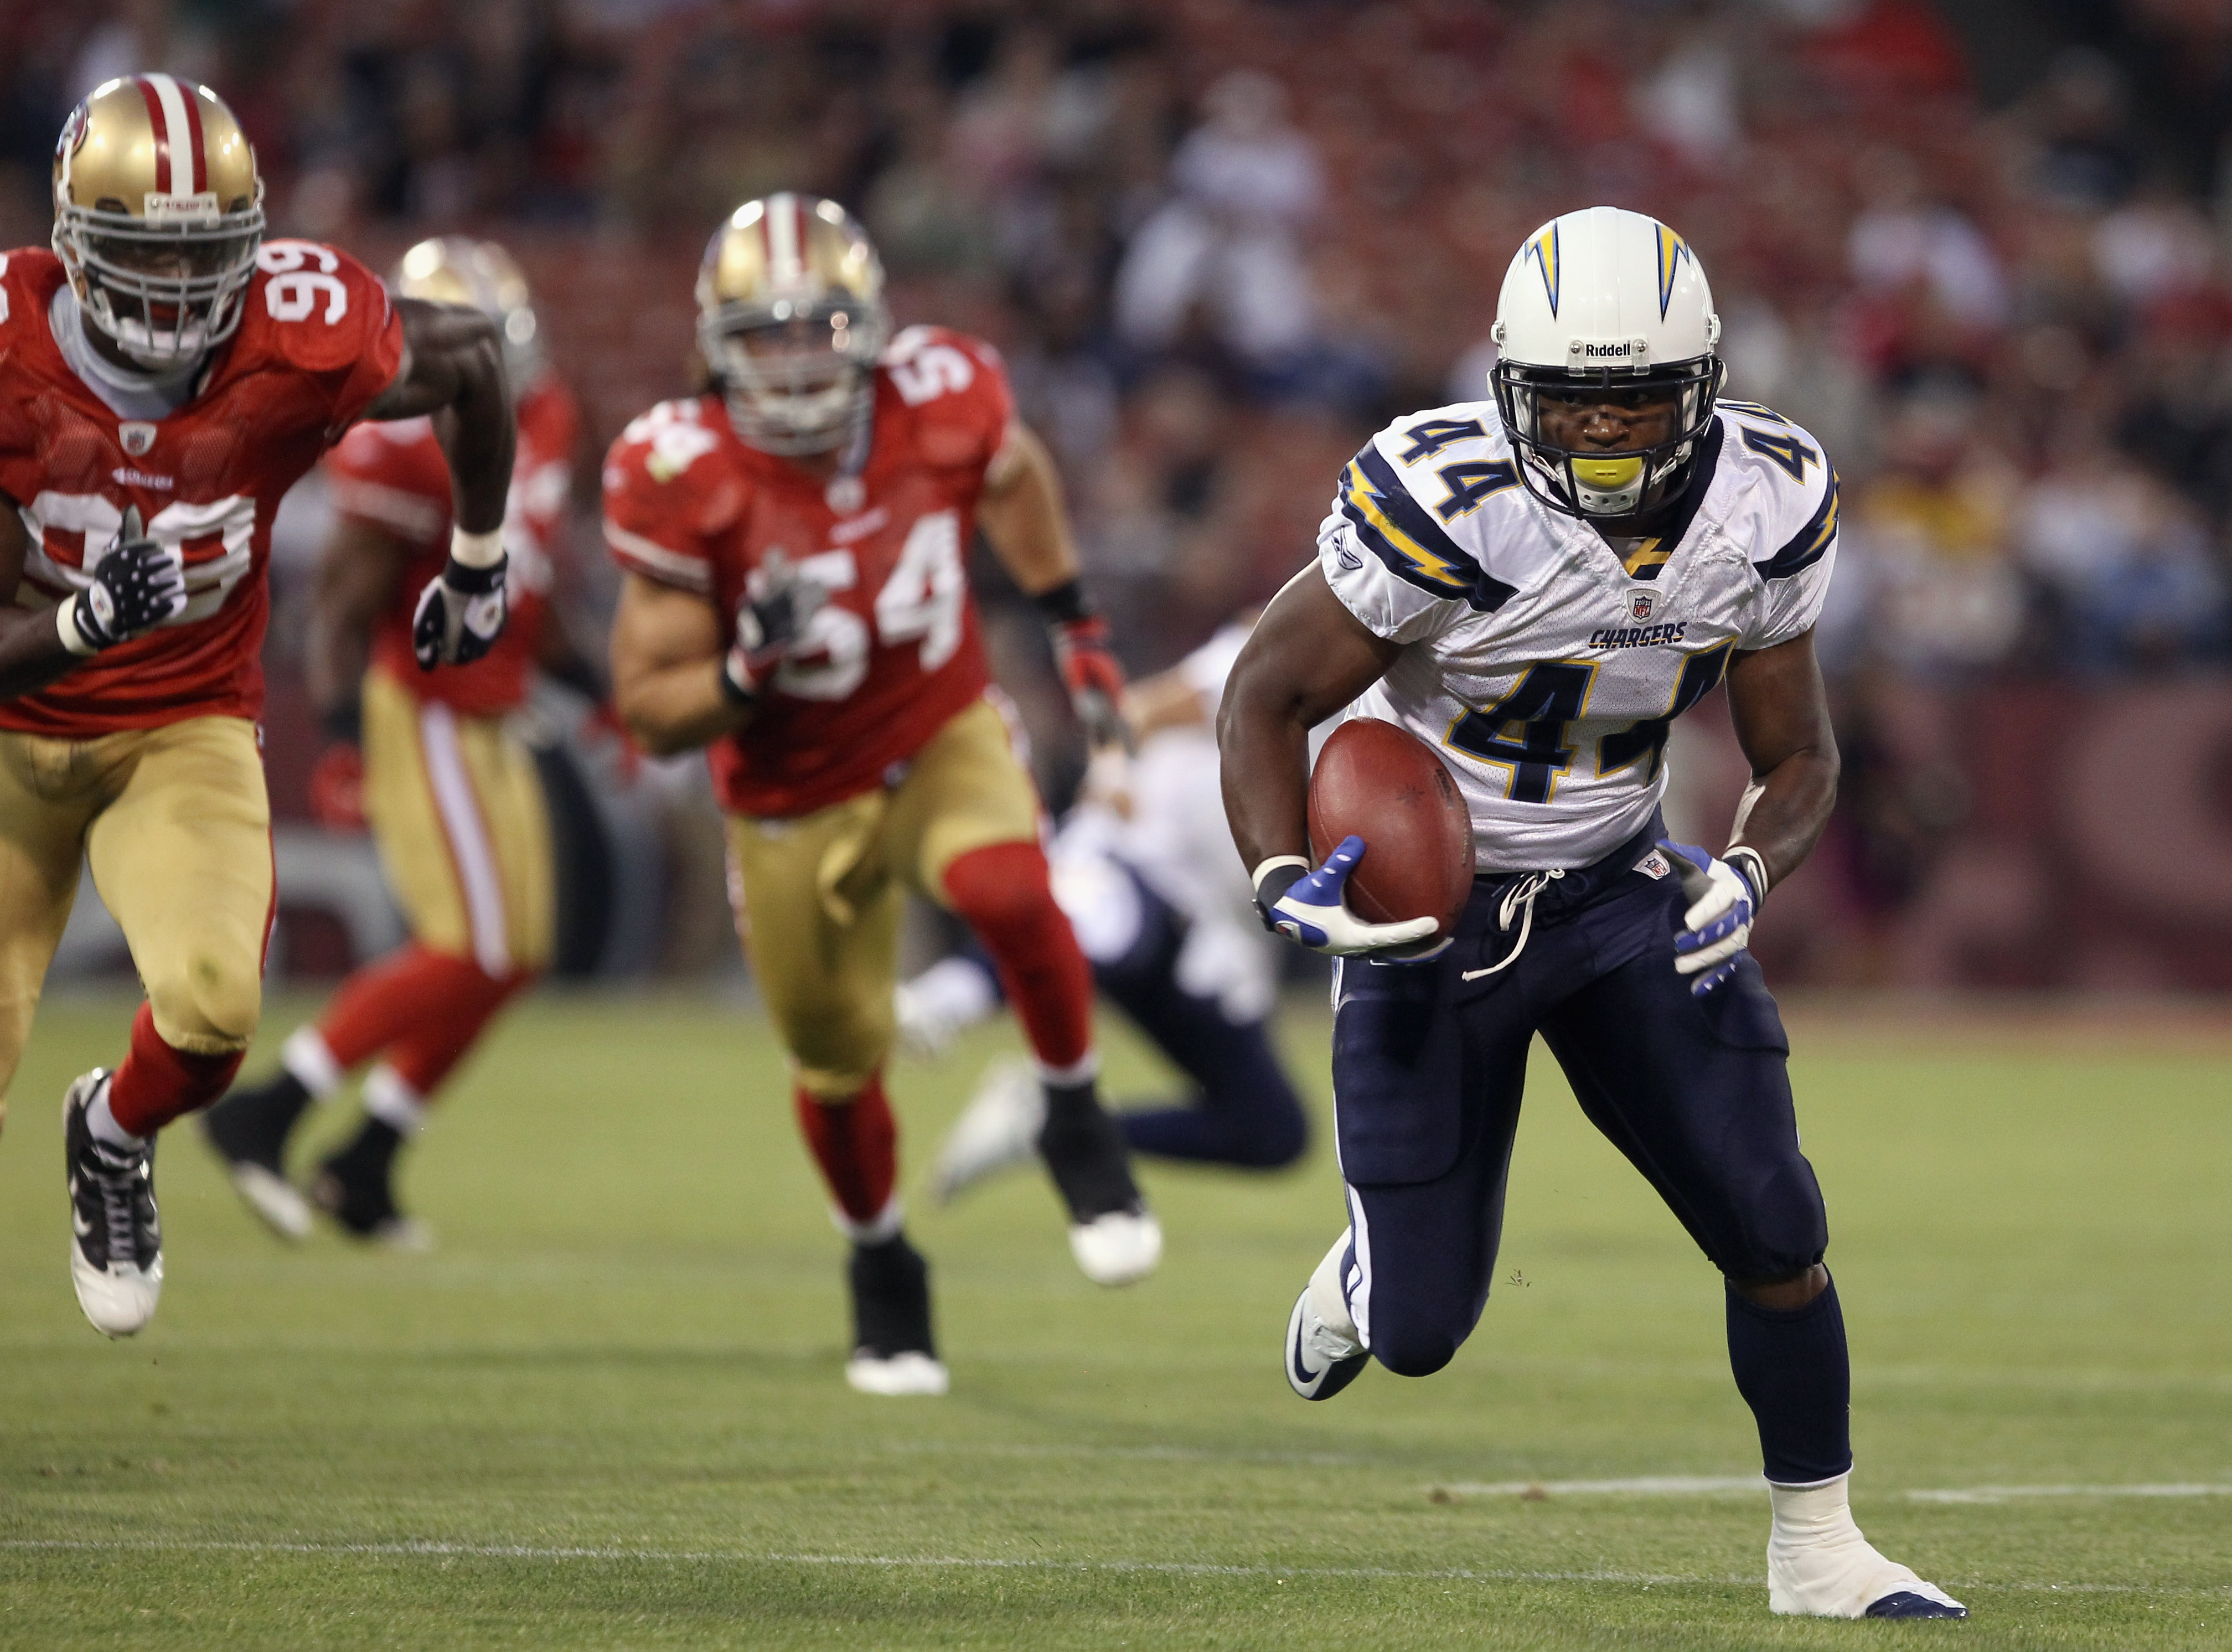 SAN FRANCISCO - SEPTEMBER 02:  Curtis Brinkley #44 of the San Diego Chargers runs with the ball during their game against the San Francisco 49ers at Candlestick Park  on September 2, 2010 in San Francisco, California.  (Photo by Ezra Shaw/Getty Images)